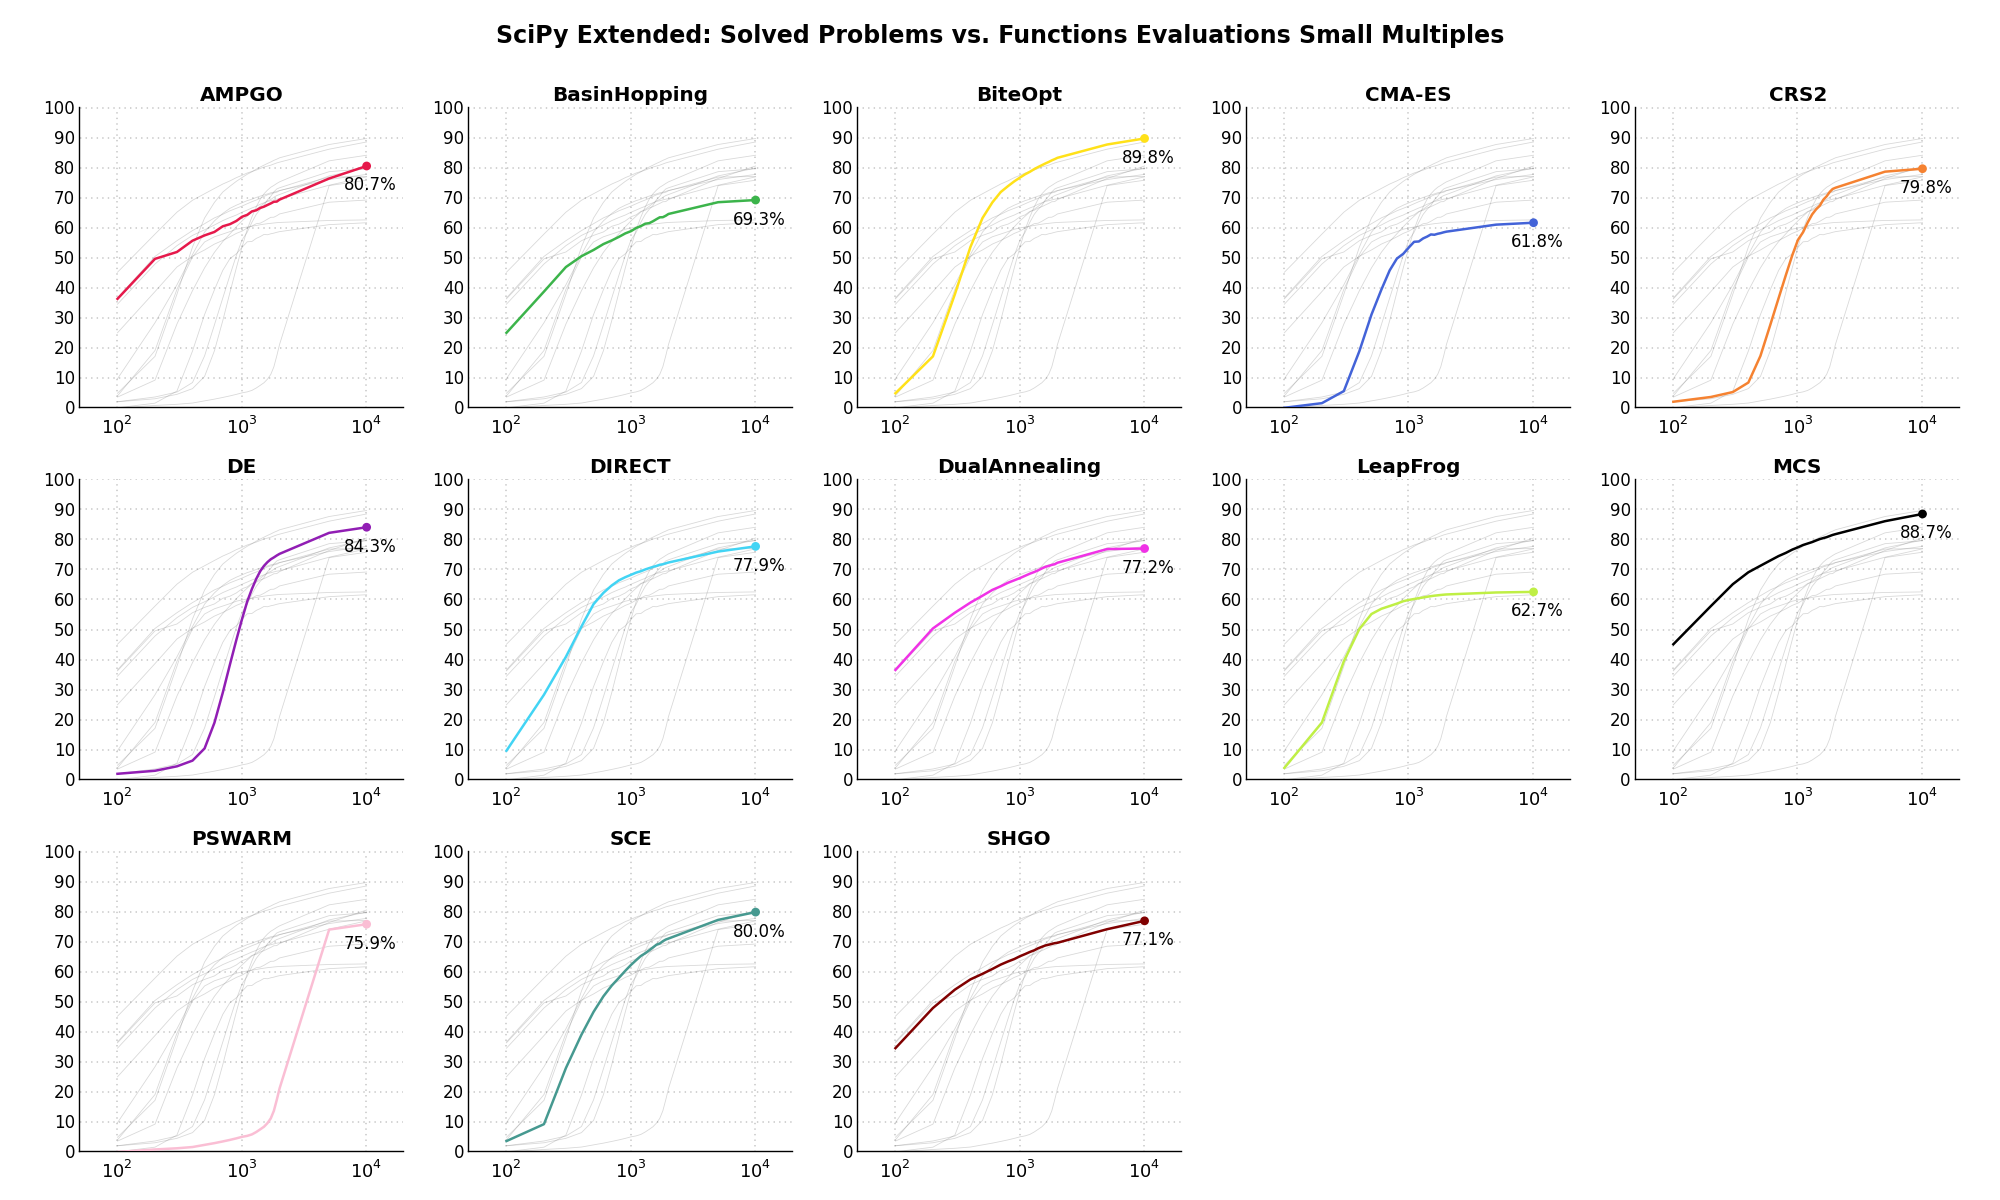 Percentage of problems solved given a fixed number of function evaluations on the SciPy Extended test suite